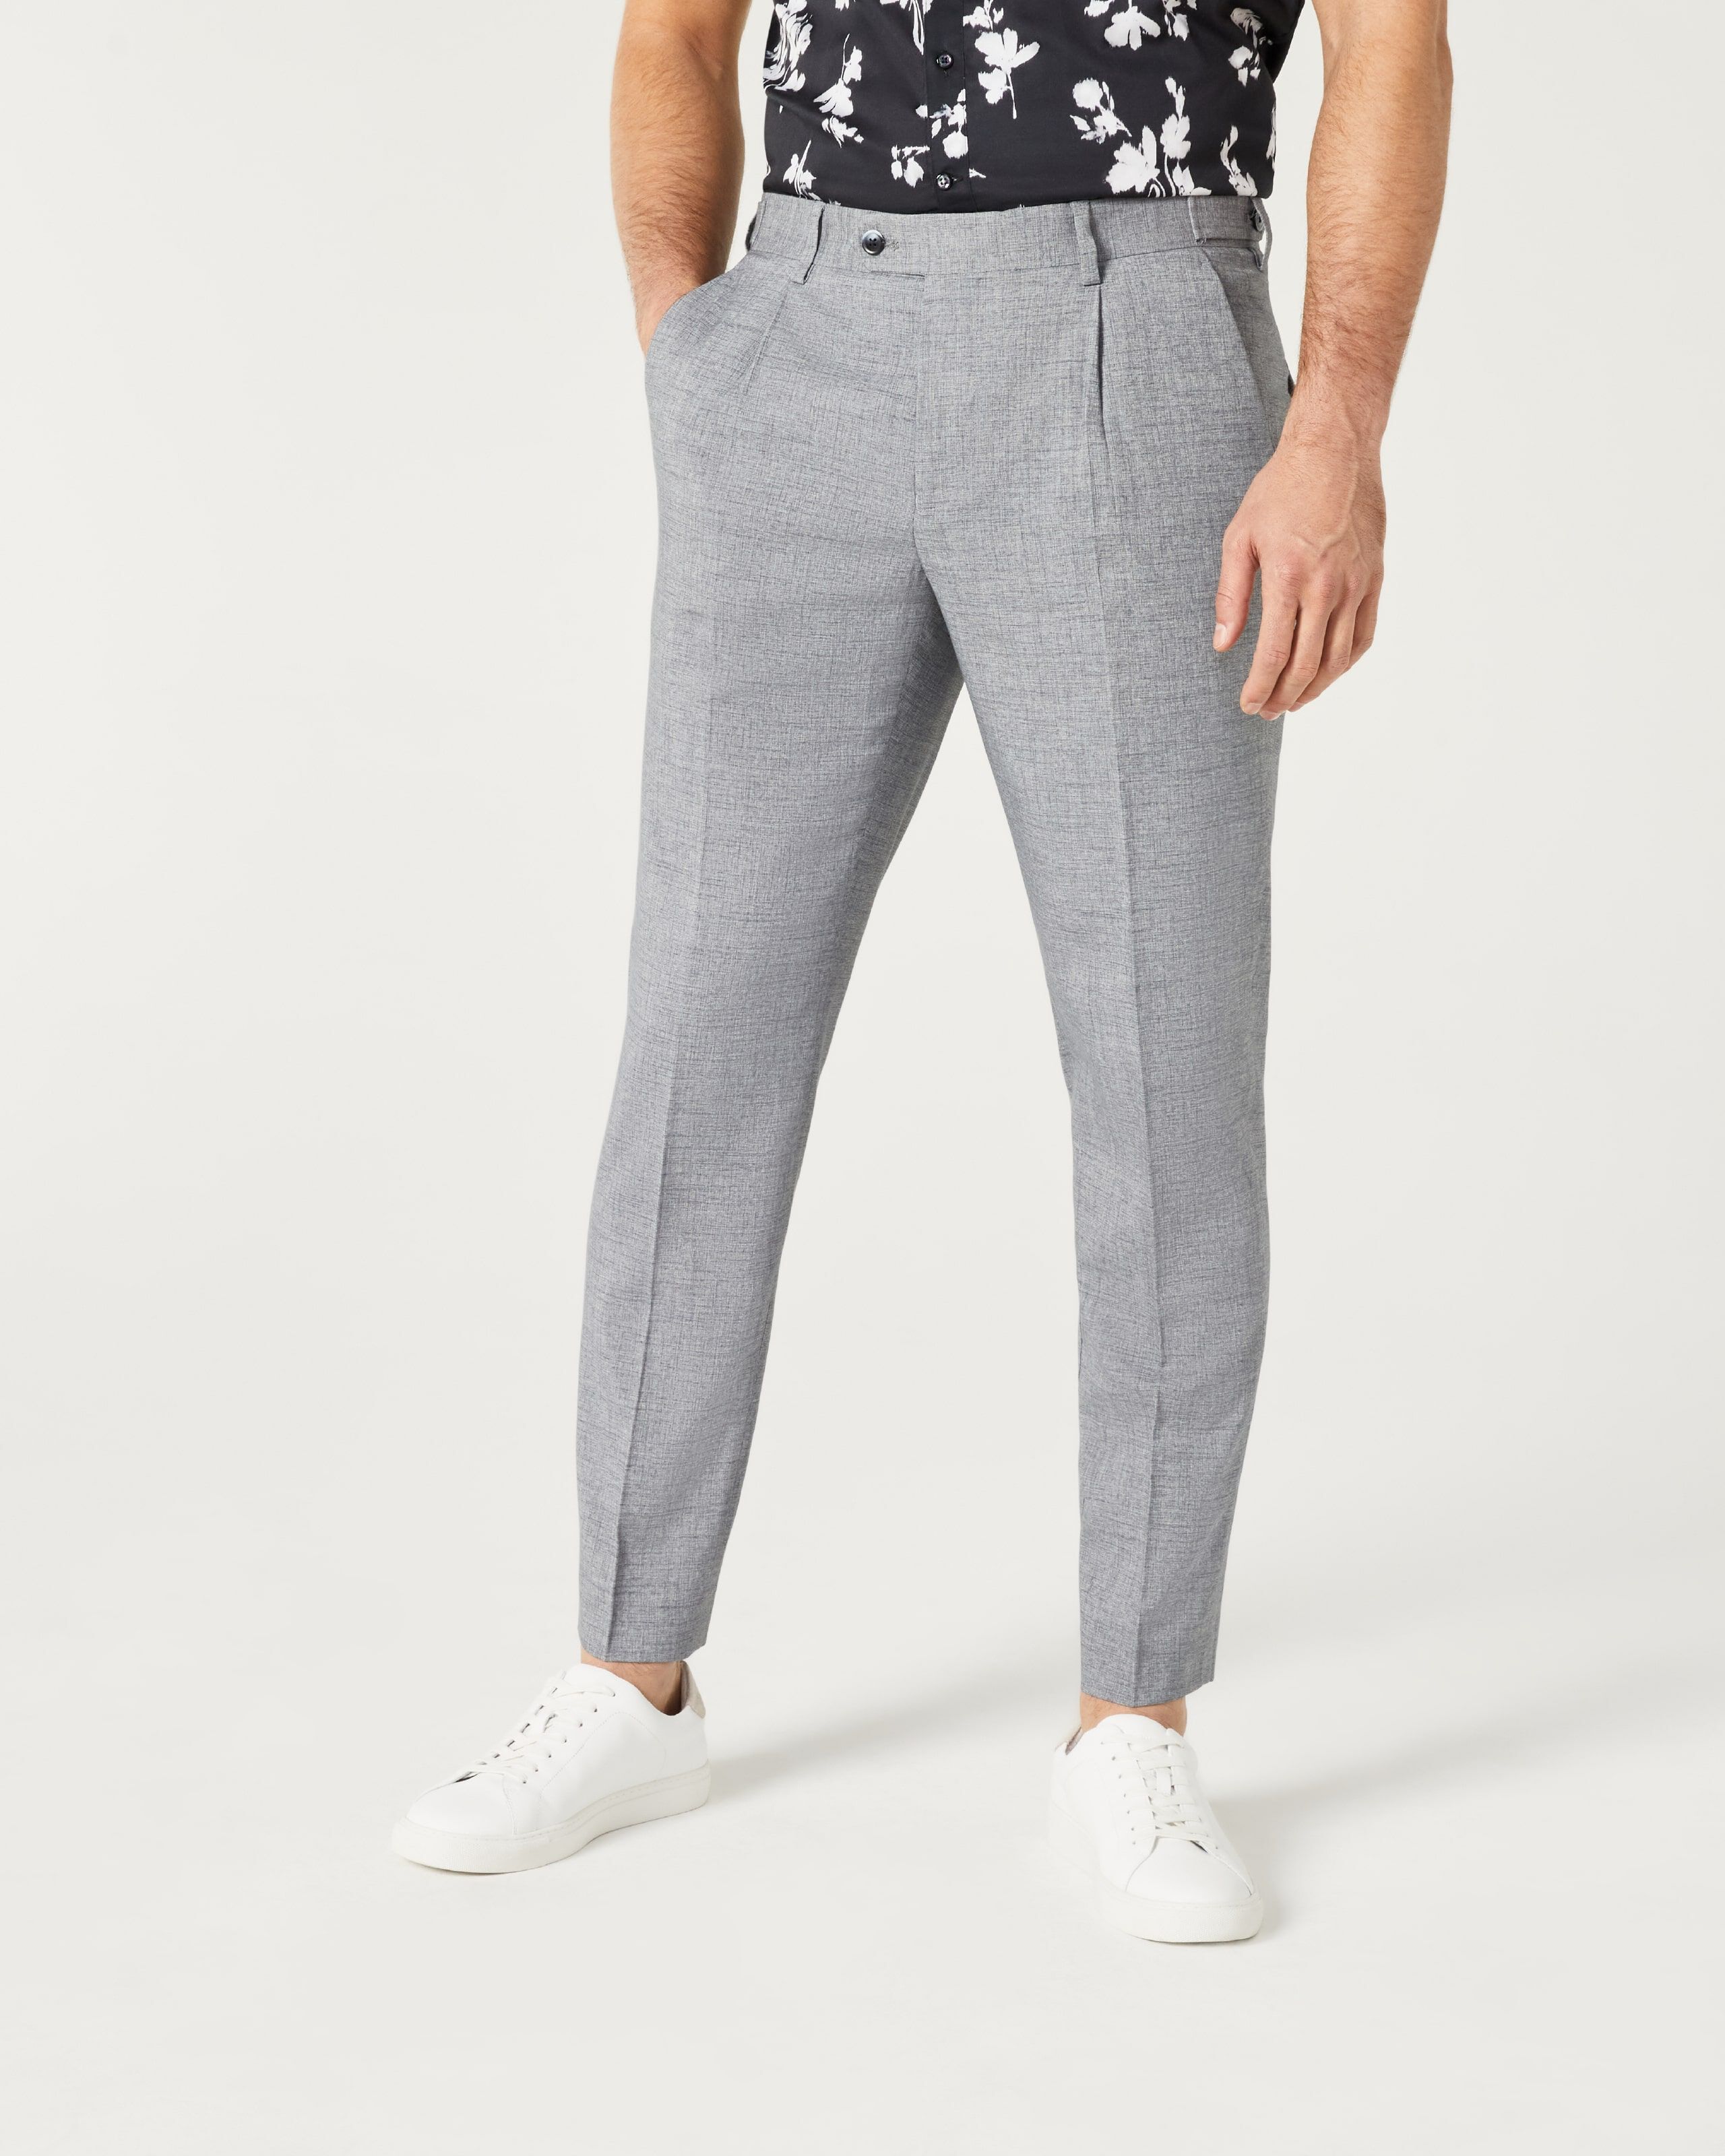 Buy Playerz Light Grey Slim Fit Formal Trouser For Men Online at Best  Prices in India - JioMart.